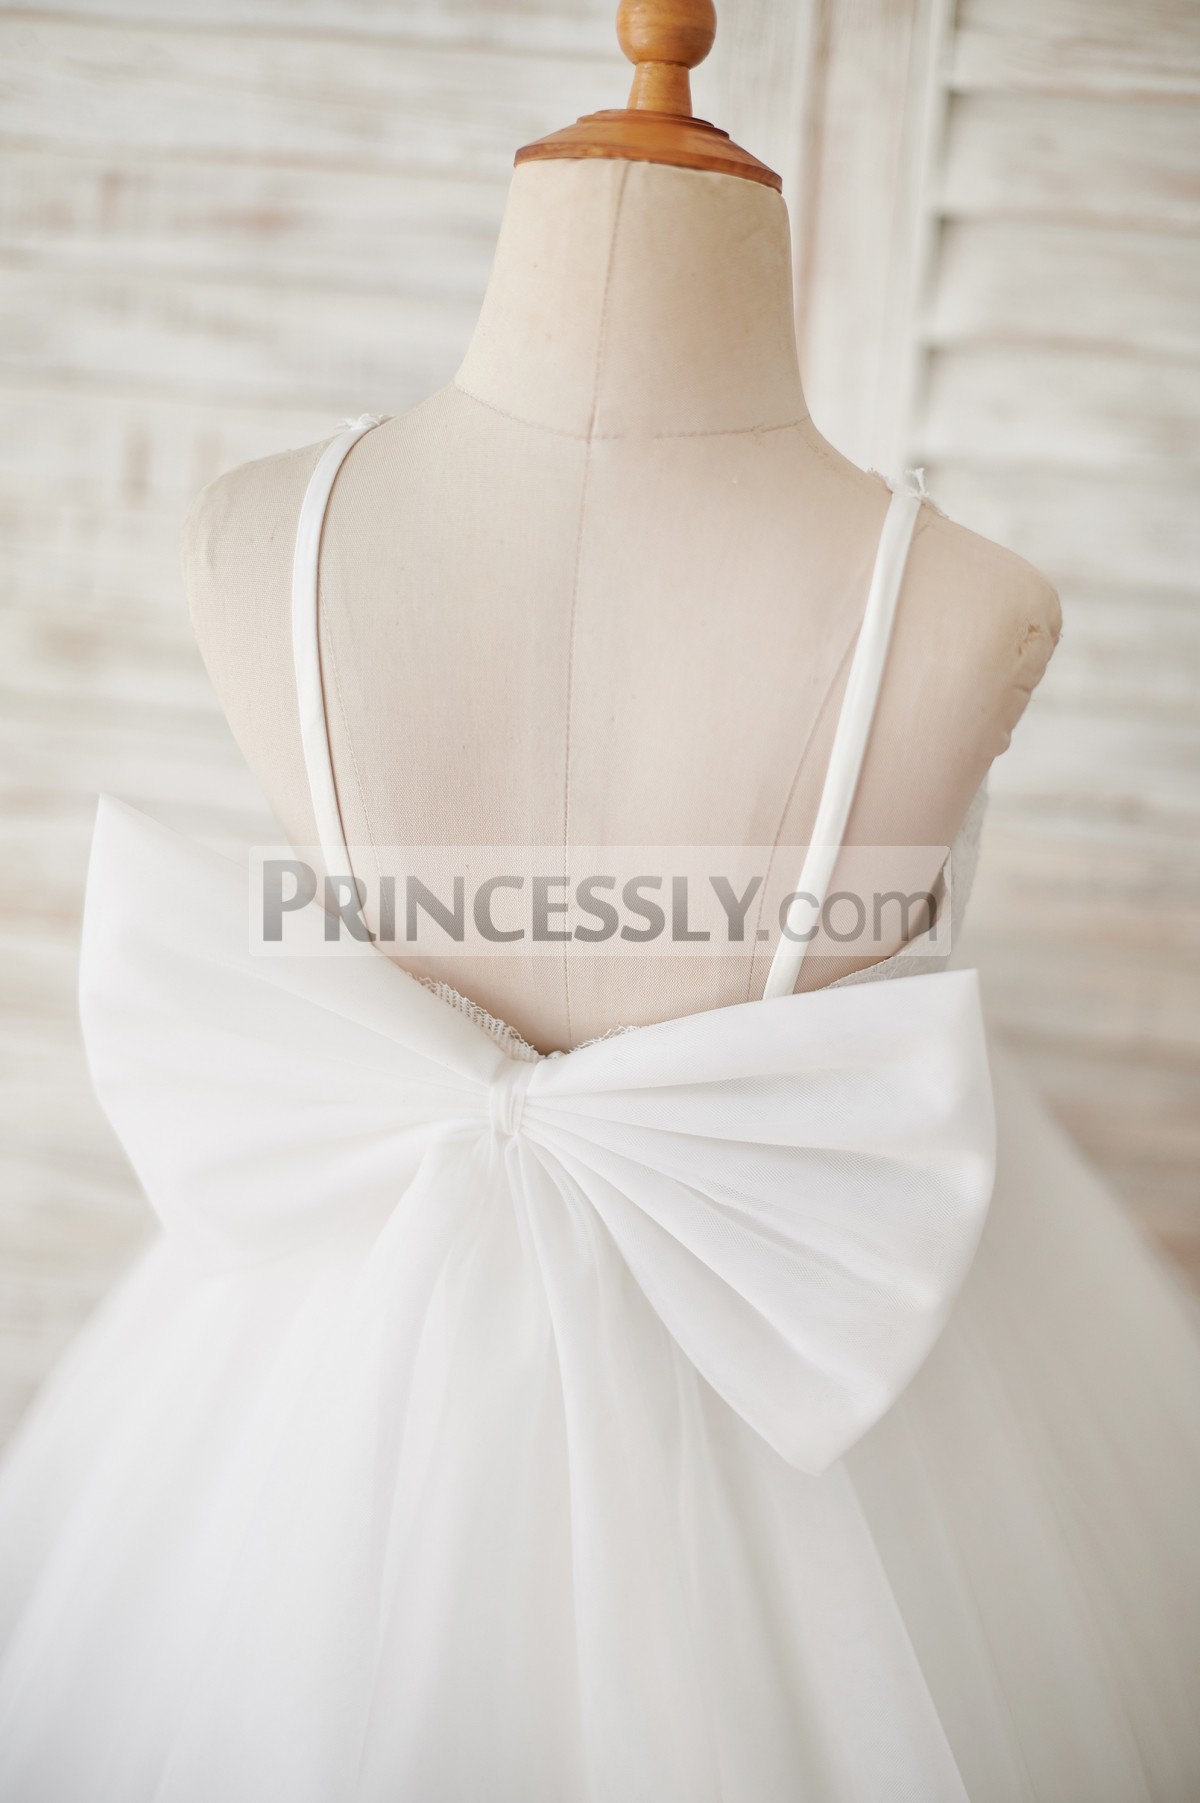 Princessly.com-K1003876-Ivory Lace Tulle Spaghetti straps Halter Neck Wedding Flower Girl Dress with Bow-31